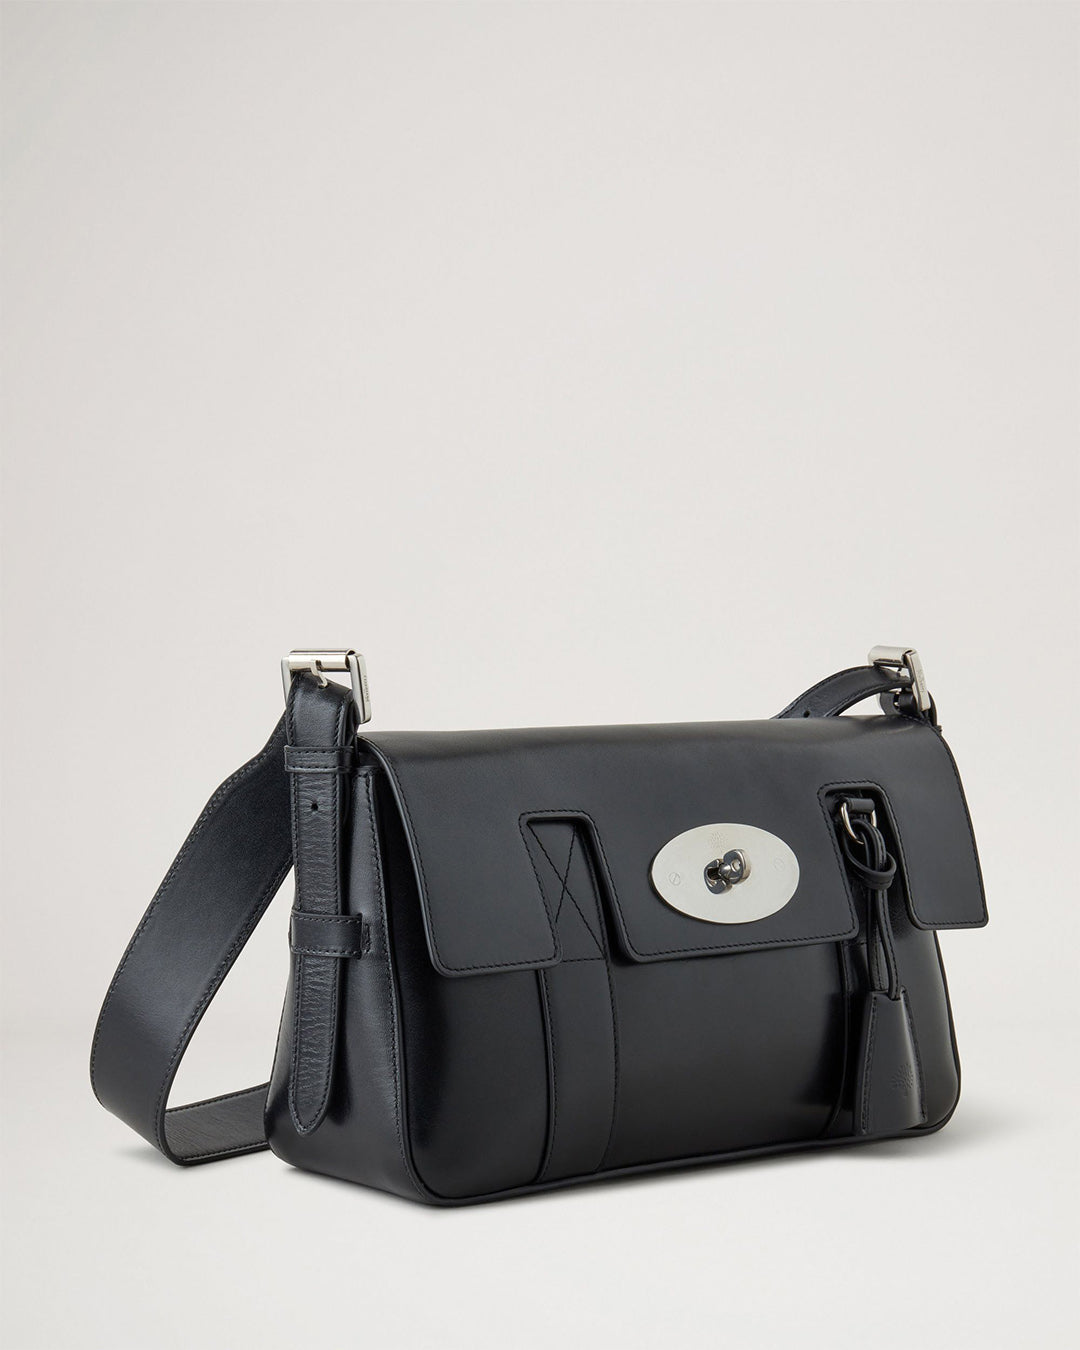 Mulberry EW Bayswater Shiny Smooth Classic